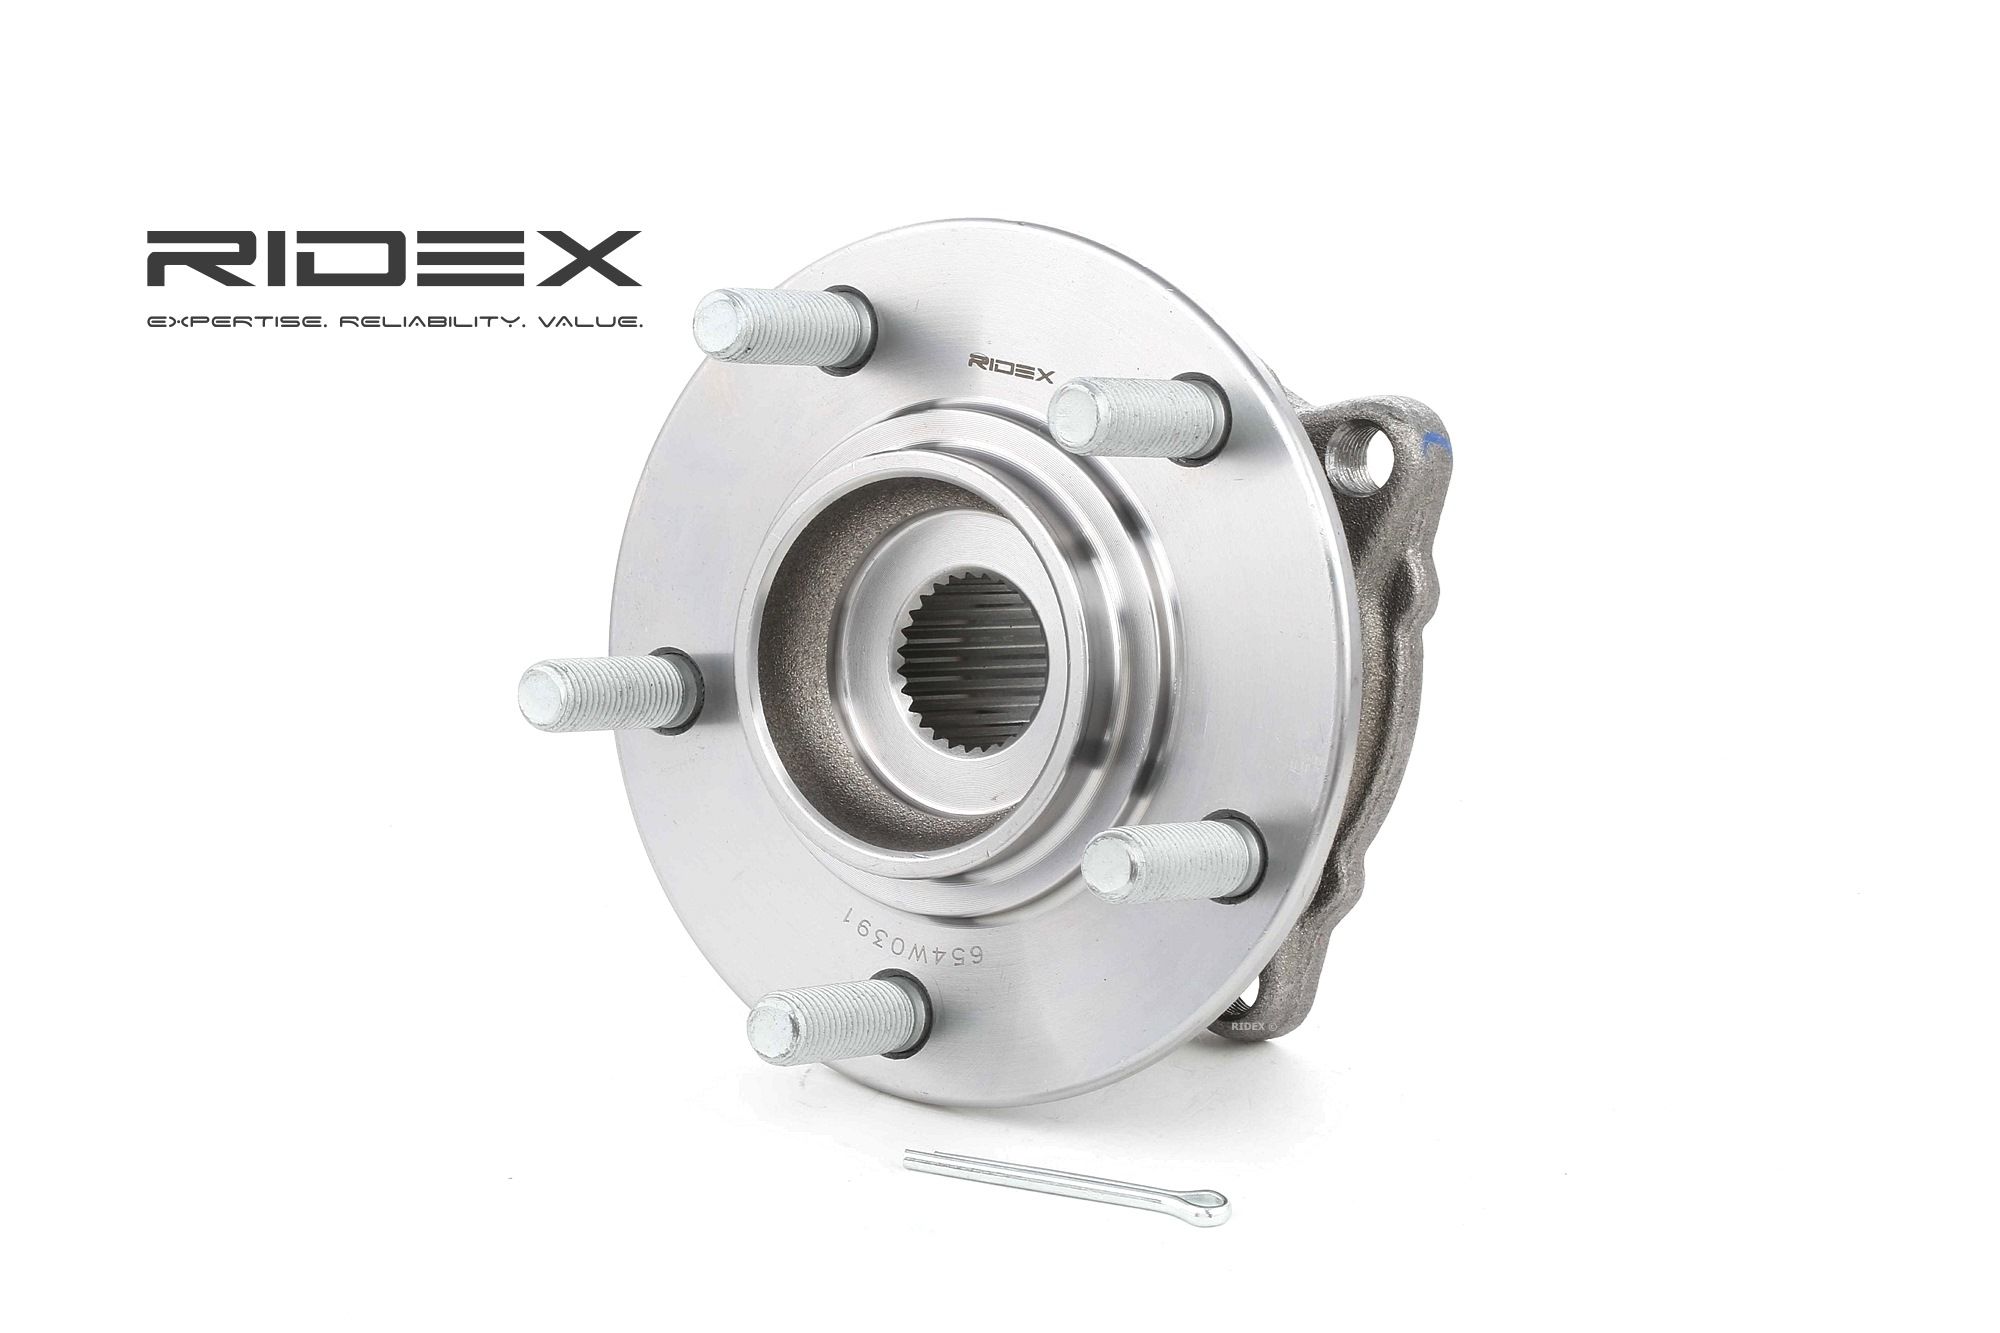 RIDEX 654W0391 Wheel bearing kit Rear Axle both sides, with integrated magnetic sensor ring, 141 mm